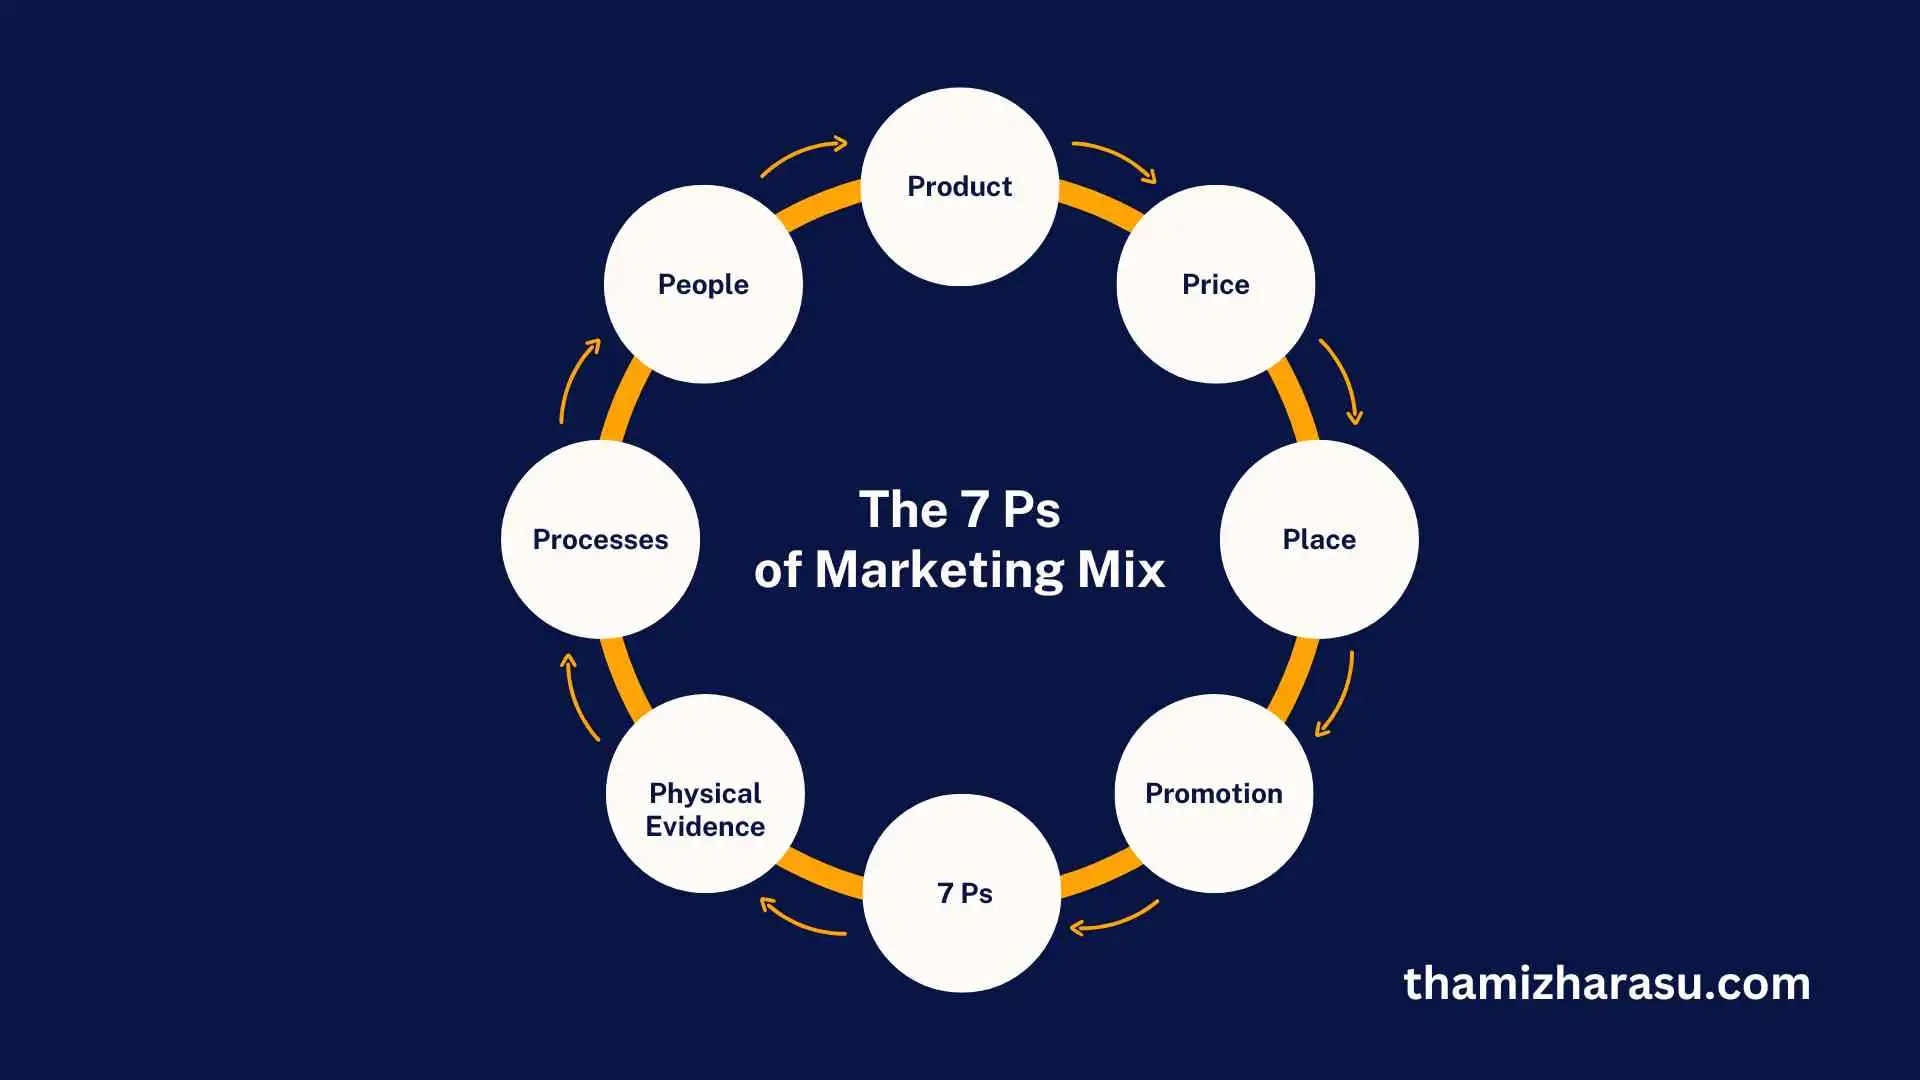 7ps of marketing mix